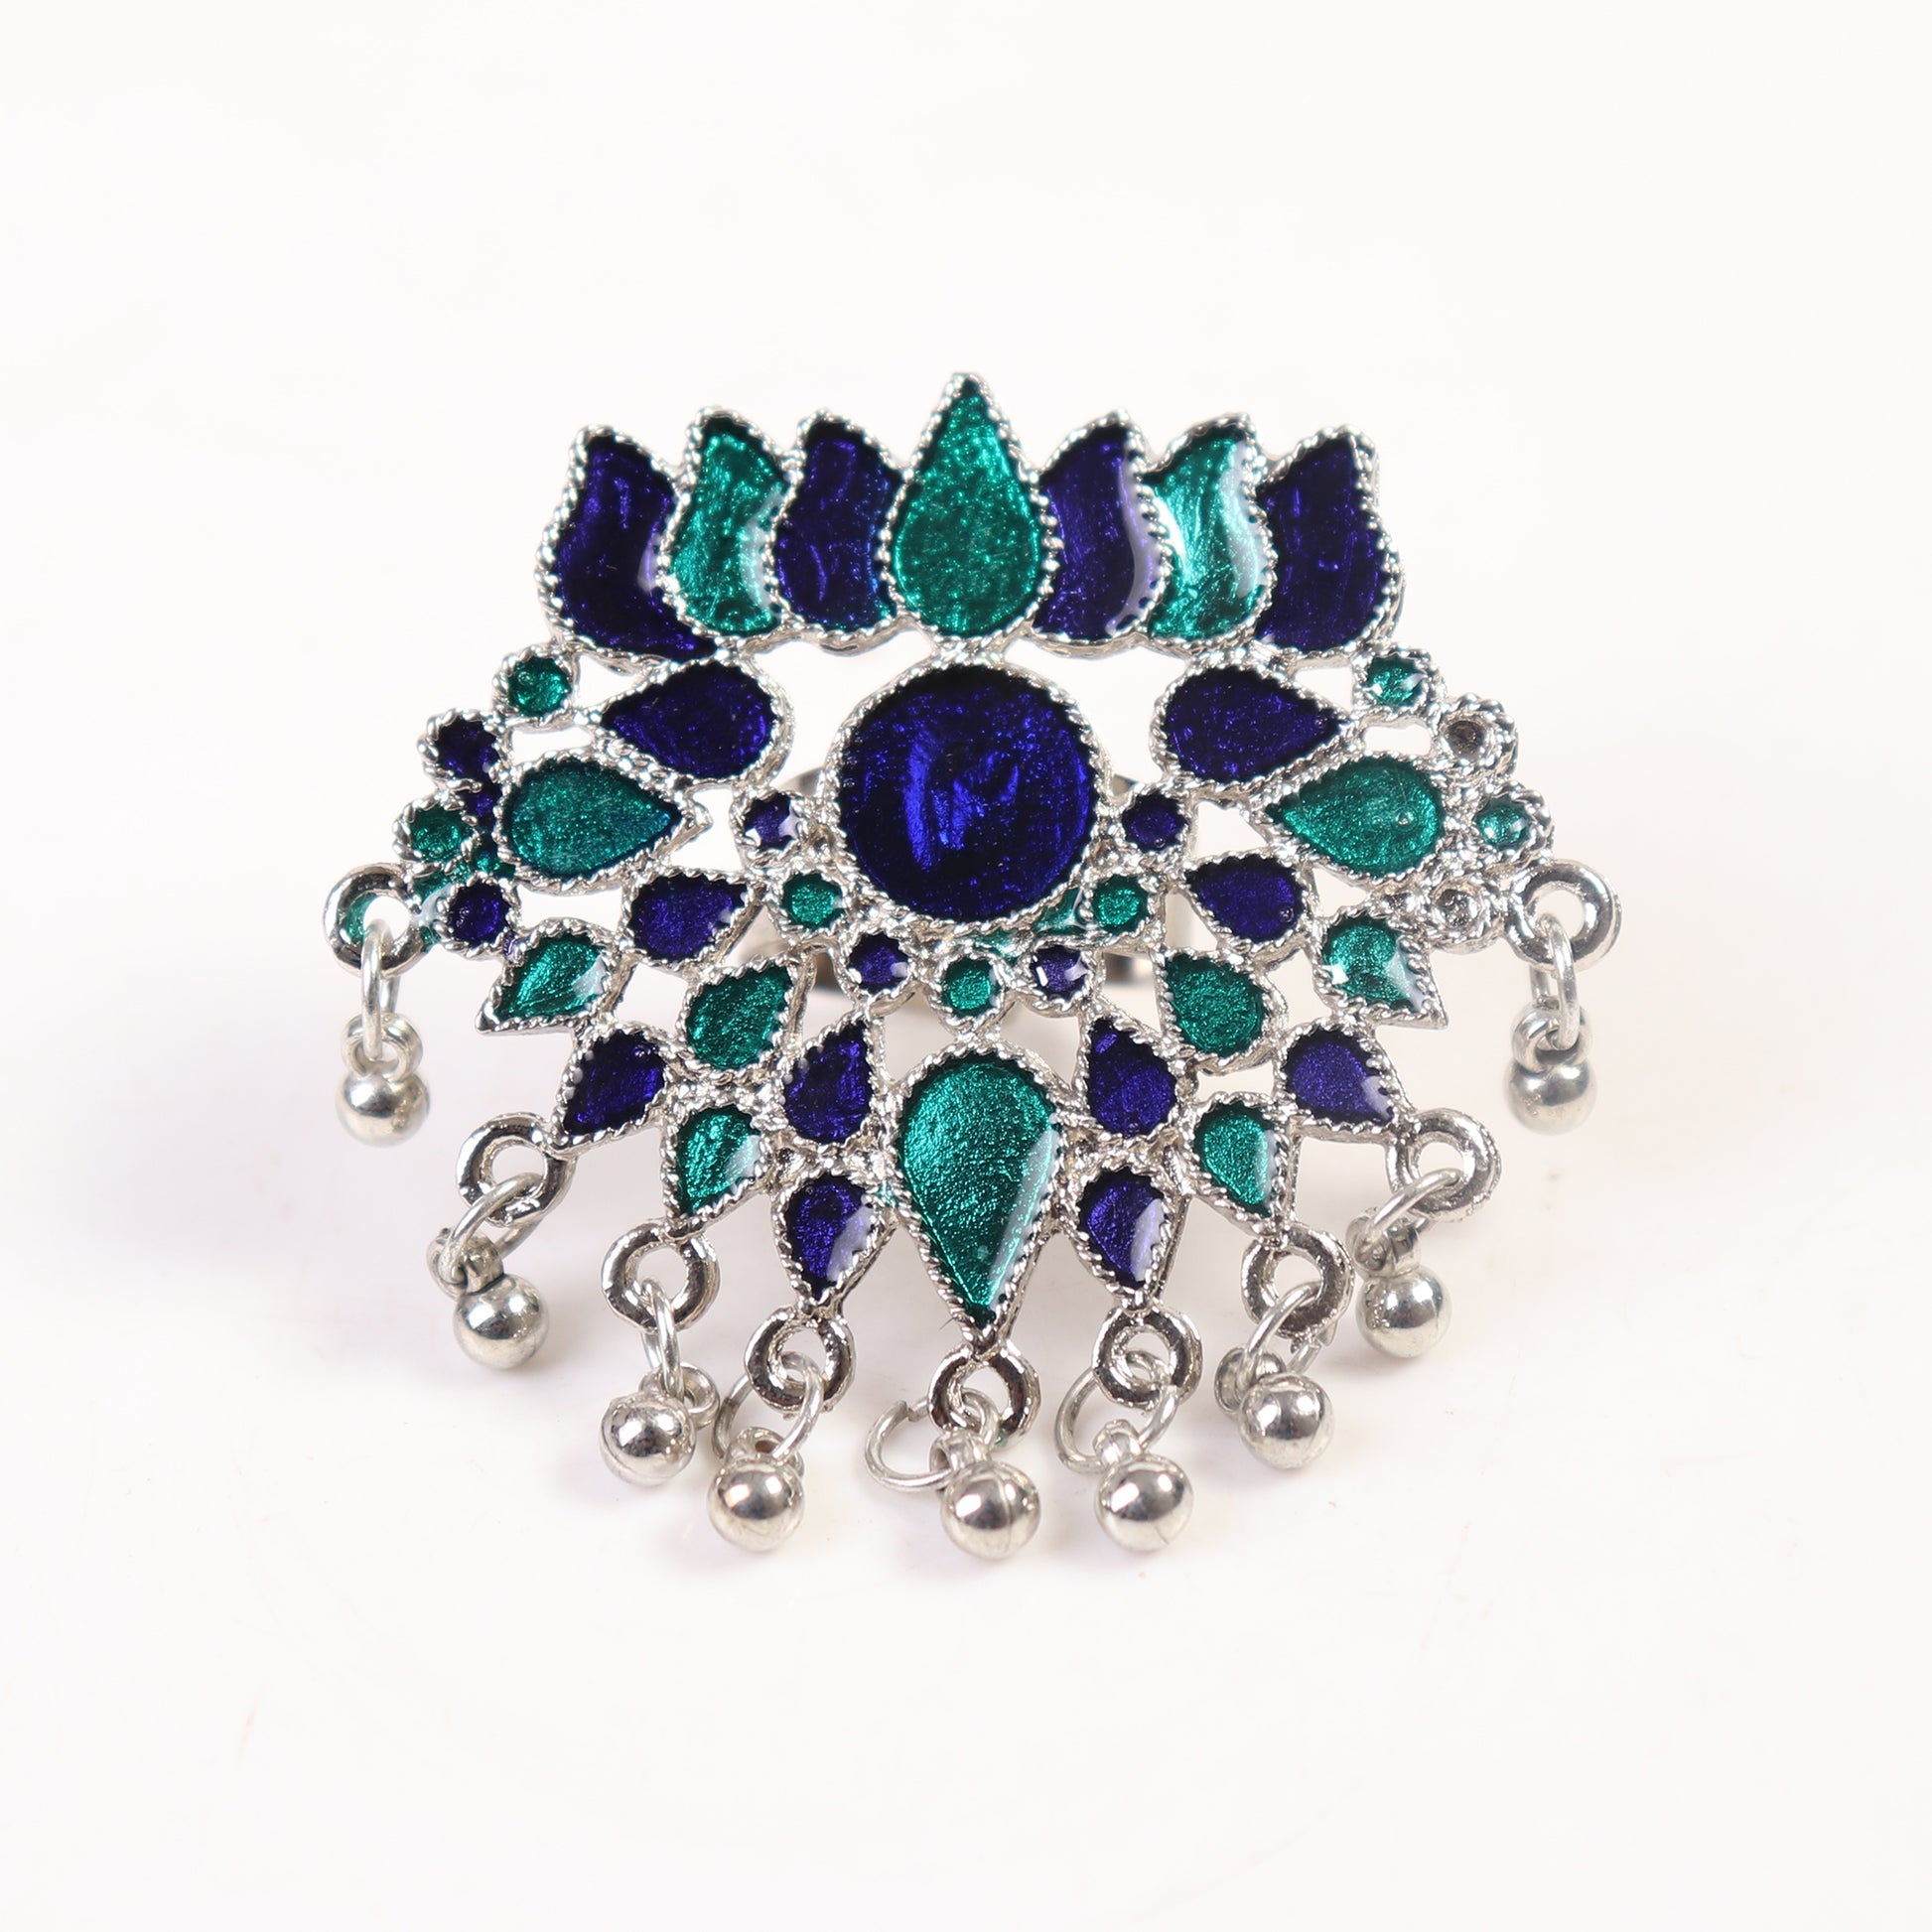 Ring,One-of-a-kind traditional Meenakari Ring - Cippele Multi Store